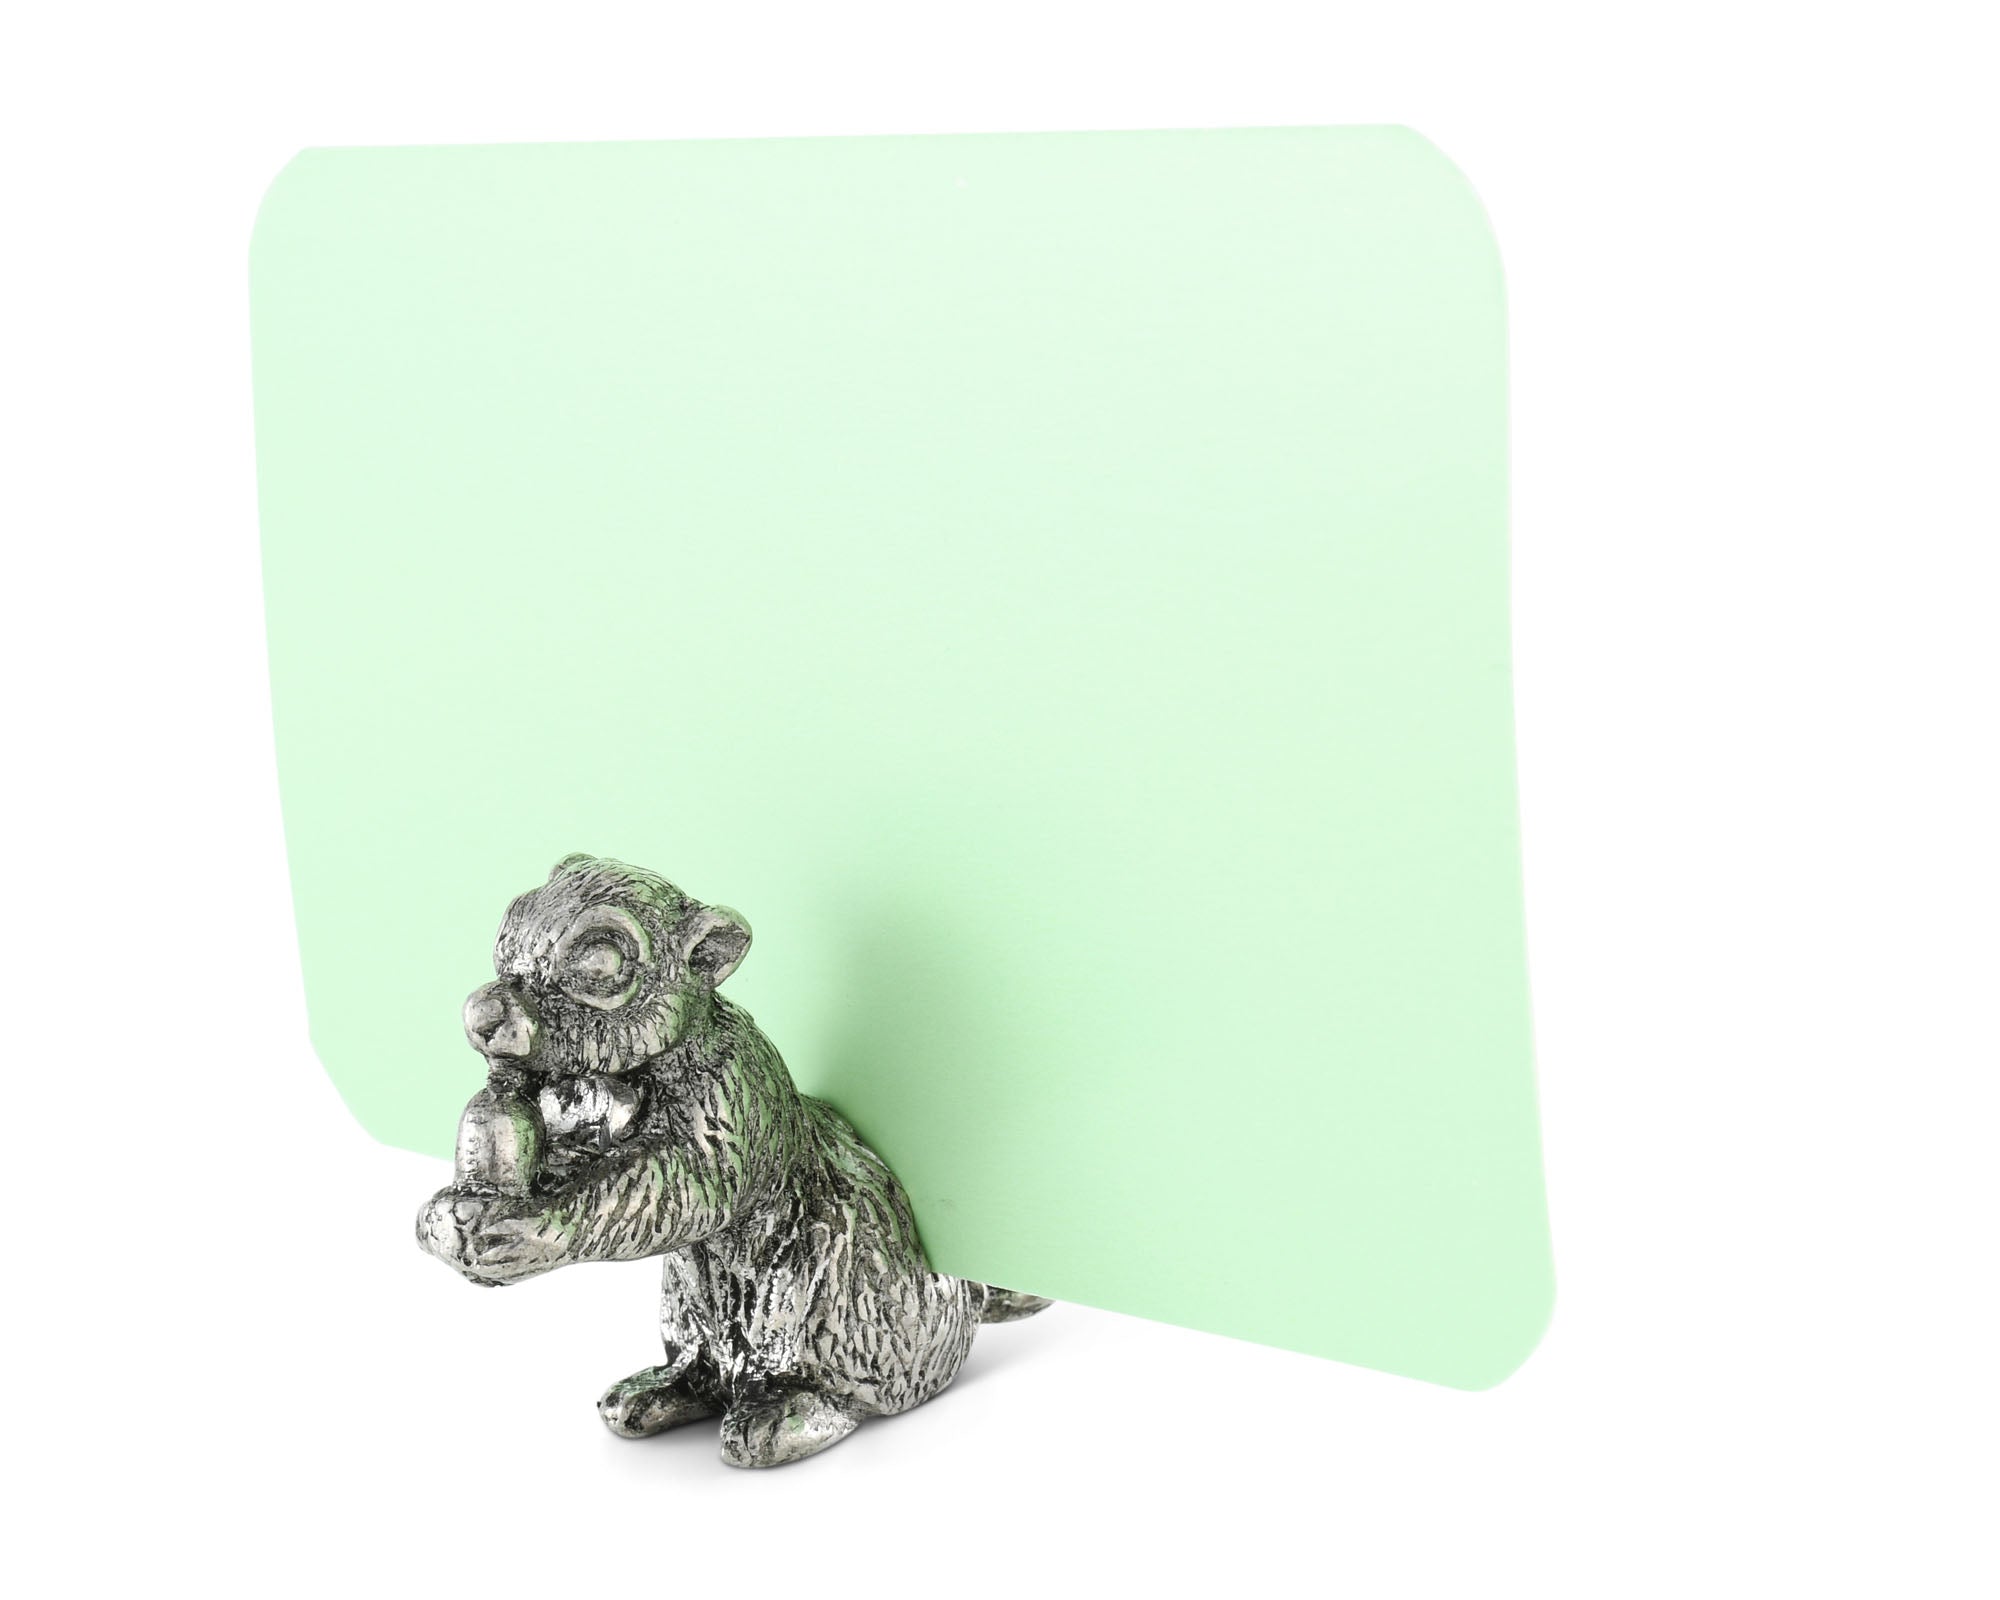 Vagabond House Pewter Squirrel Place Card Holder Product Image